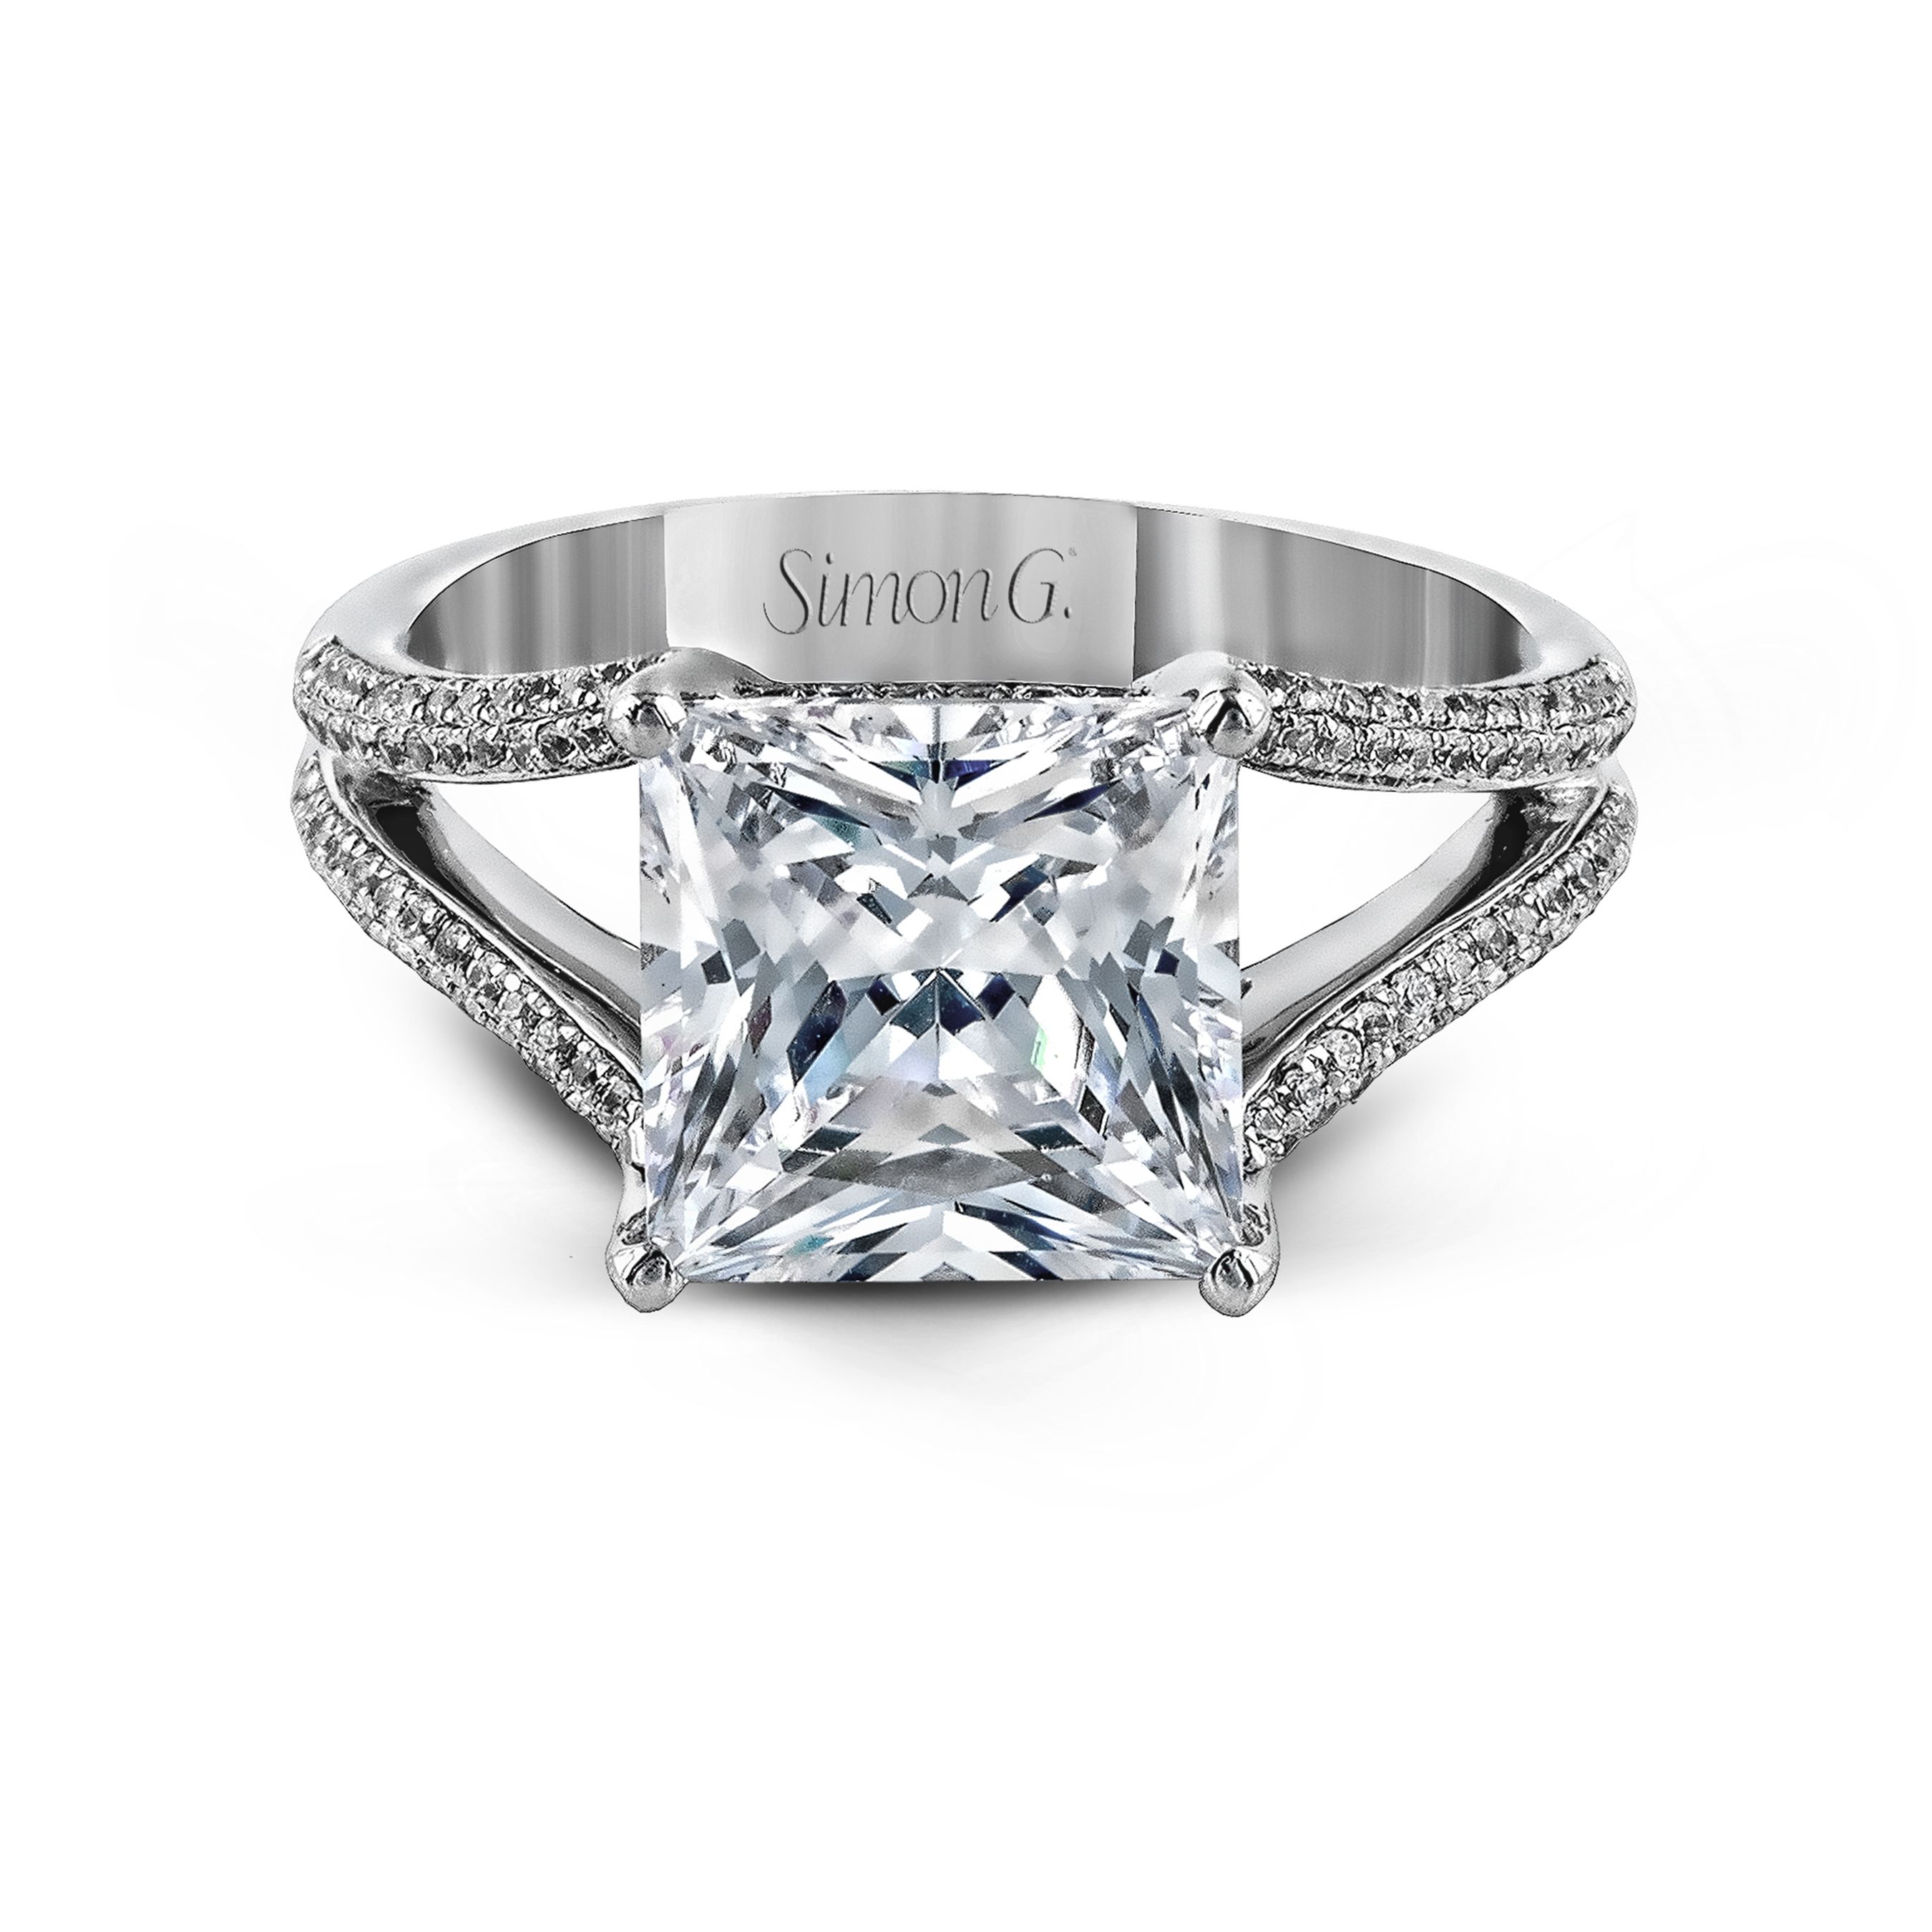 MR2257 Modern Enchantment Collection White Gold Princess Cut Engagement Ring